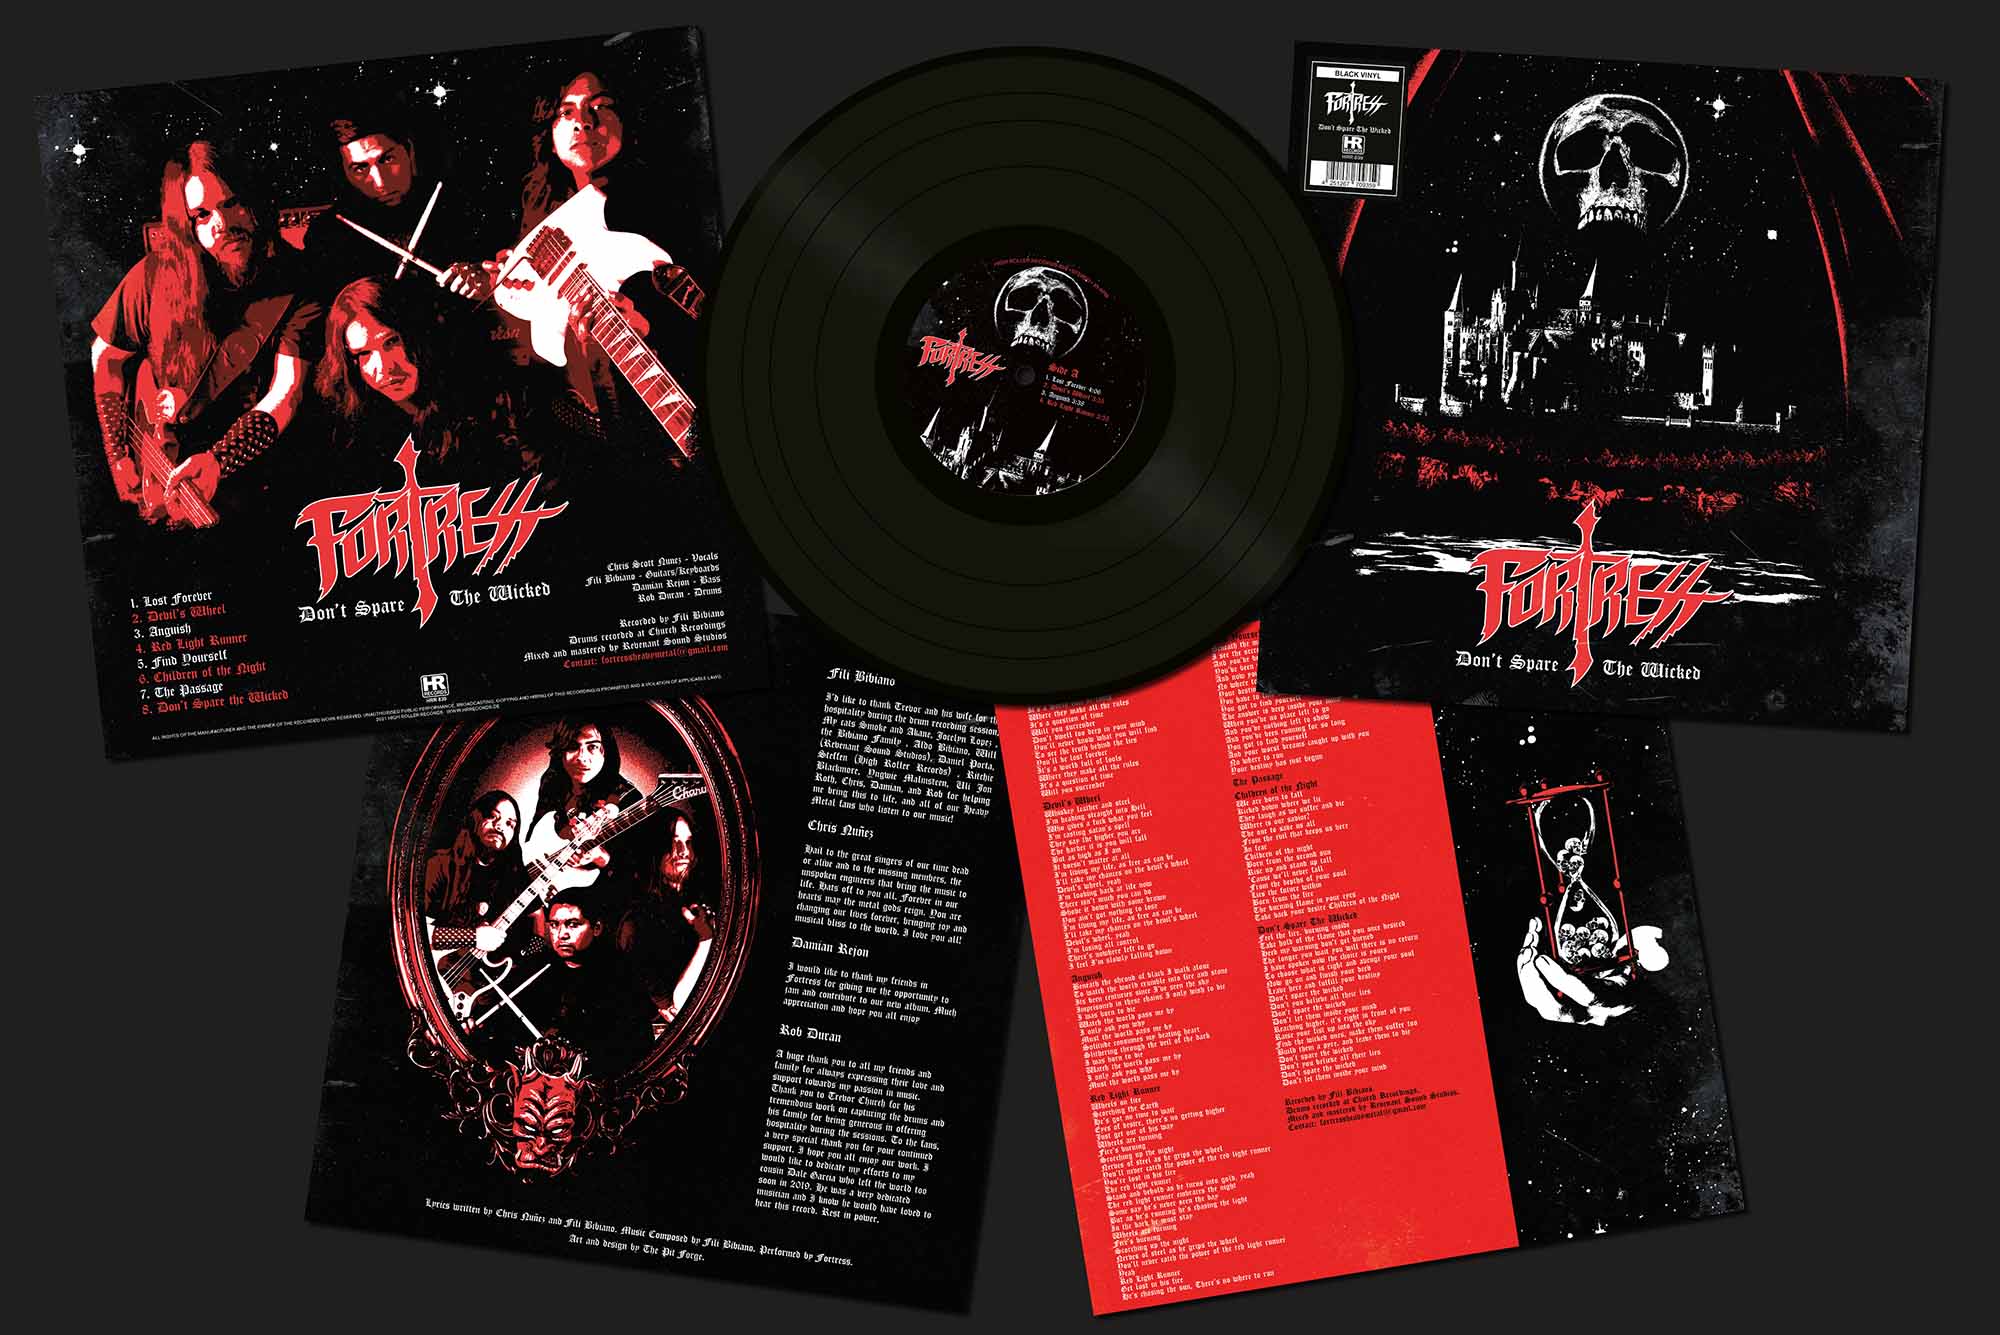 FORTRESS - Don't Spare the Wicked  LP